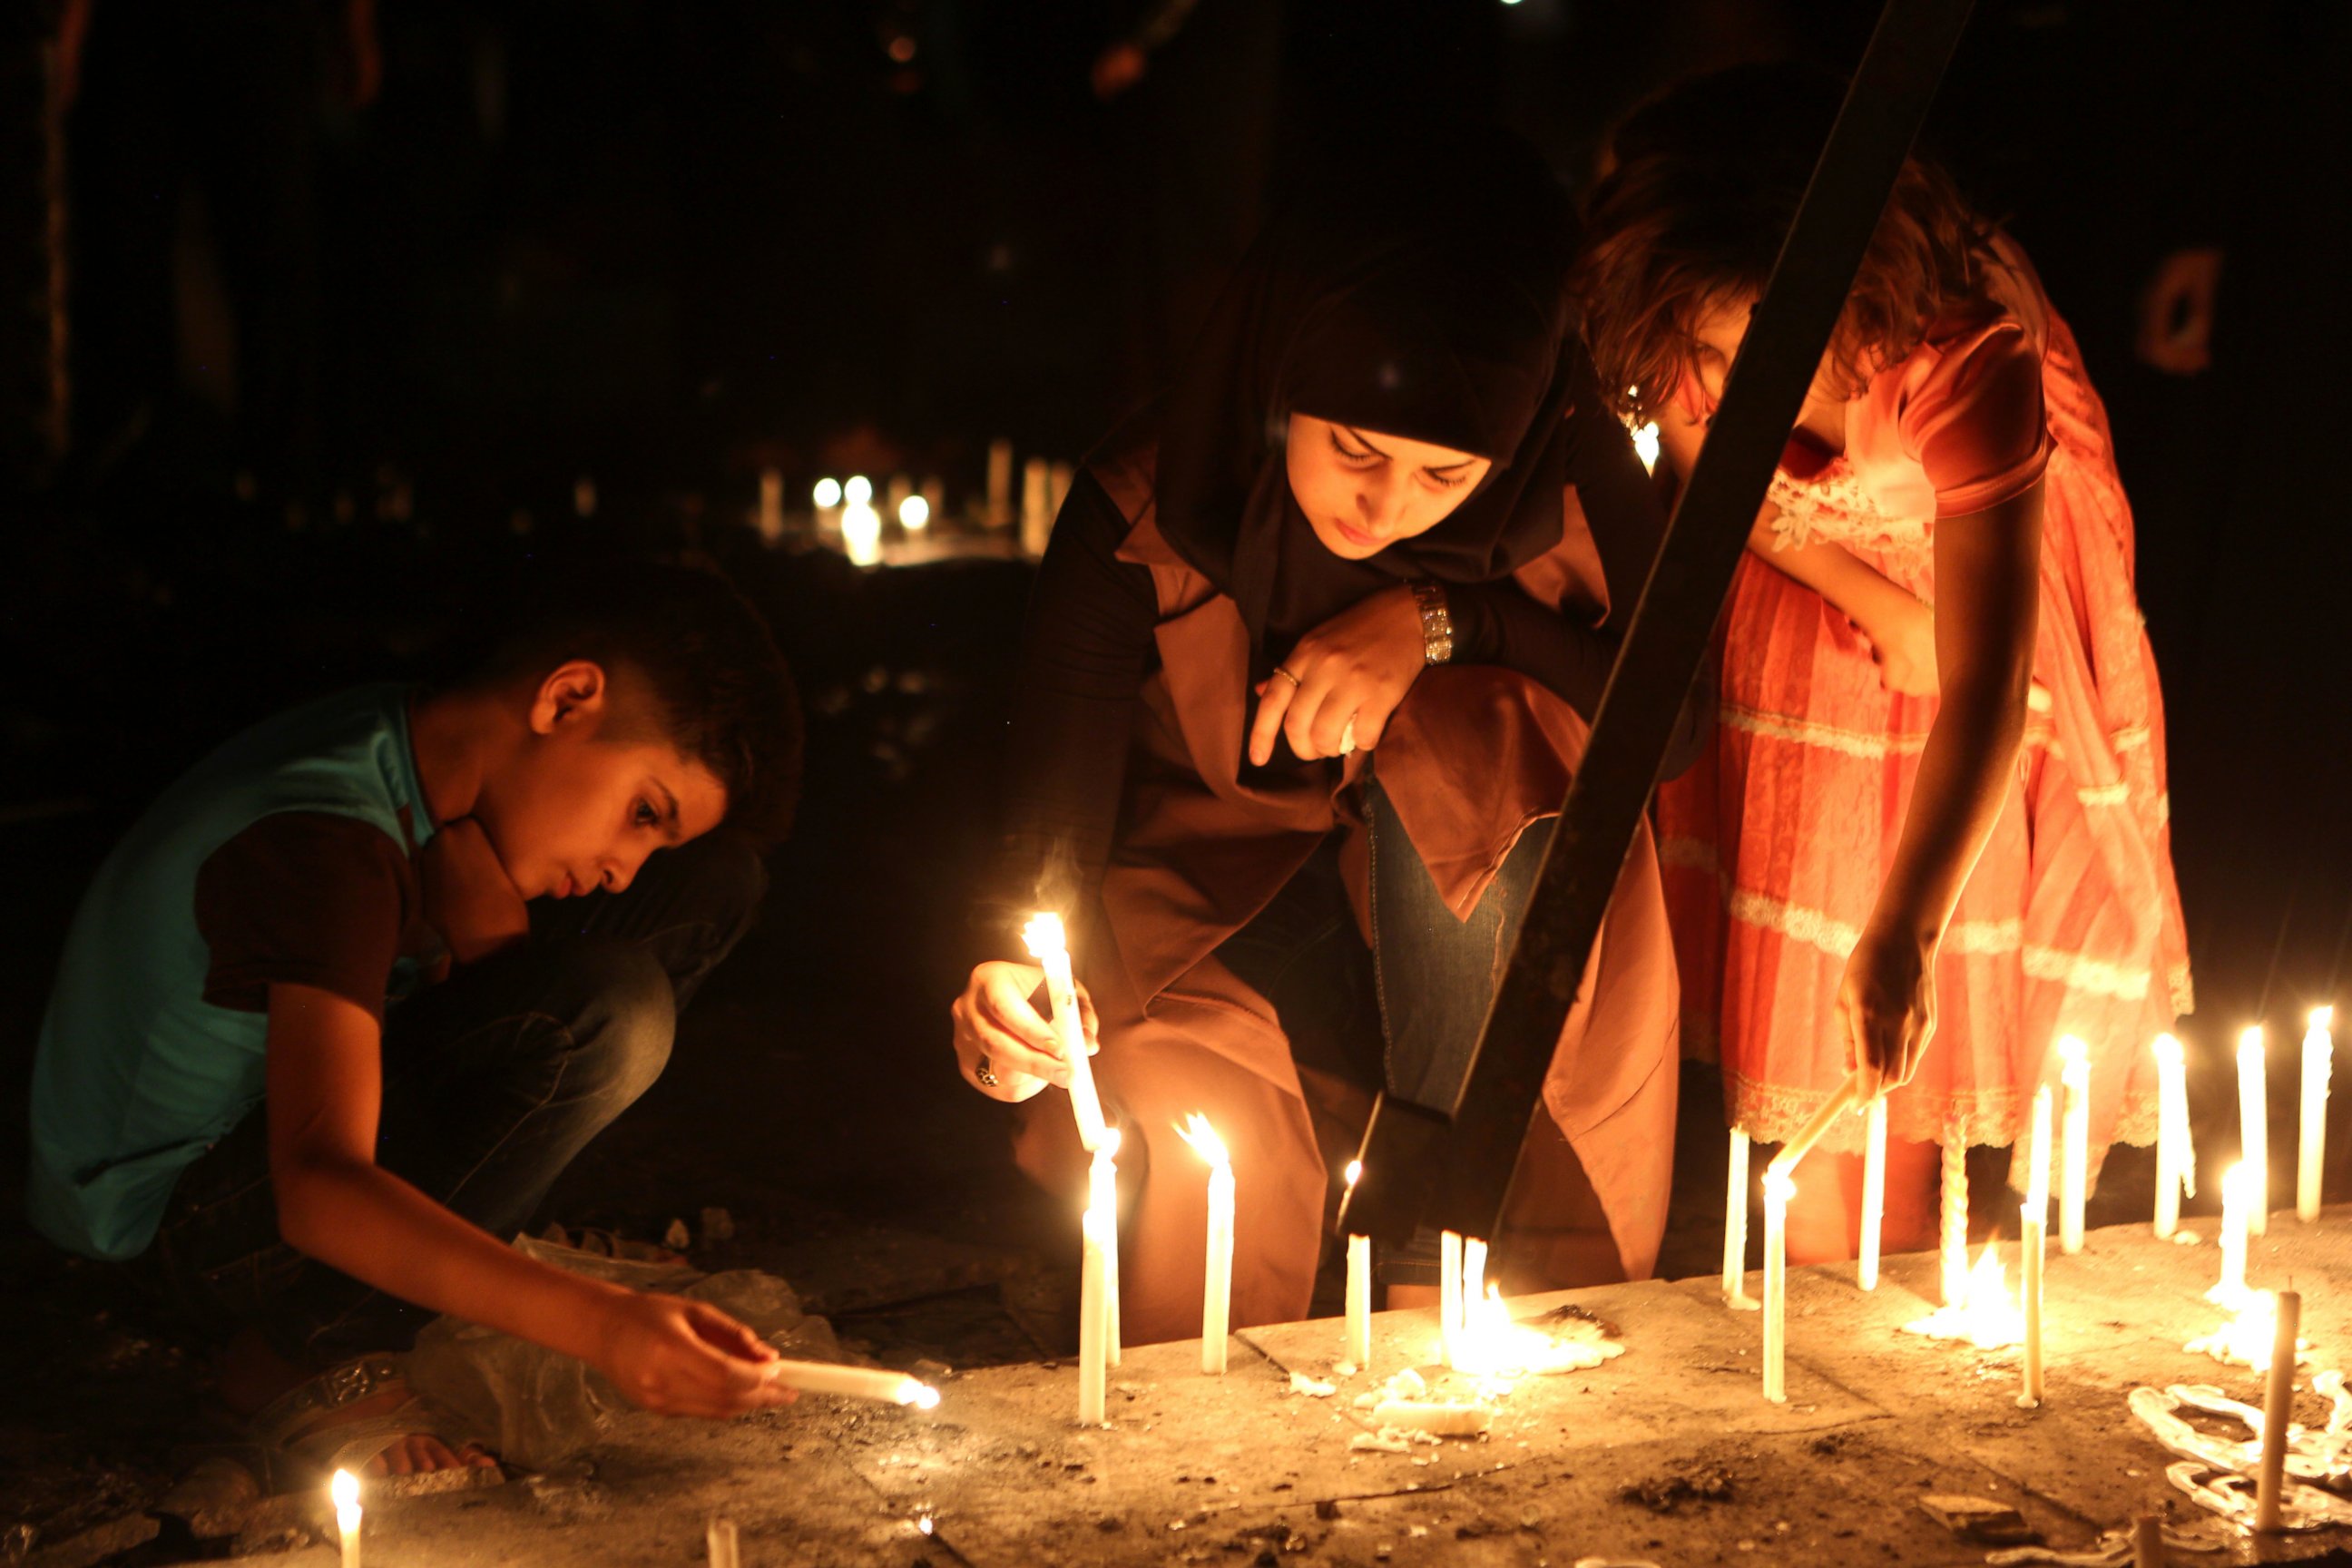 PHOTO: People light candles at the scene of a massive car bomb attack in Karada, a busy shopping district where people were shopping for the upcoming Eid al-Fitr holiday, in the center of Baghdad, Iraq, July 3, 2016.